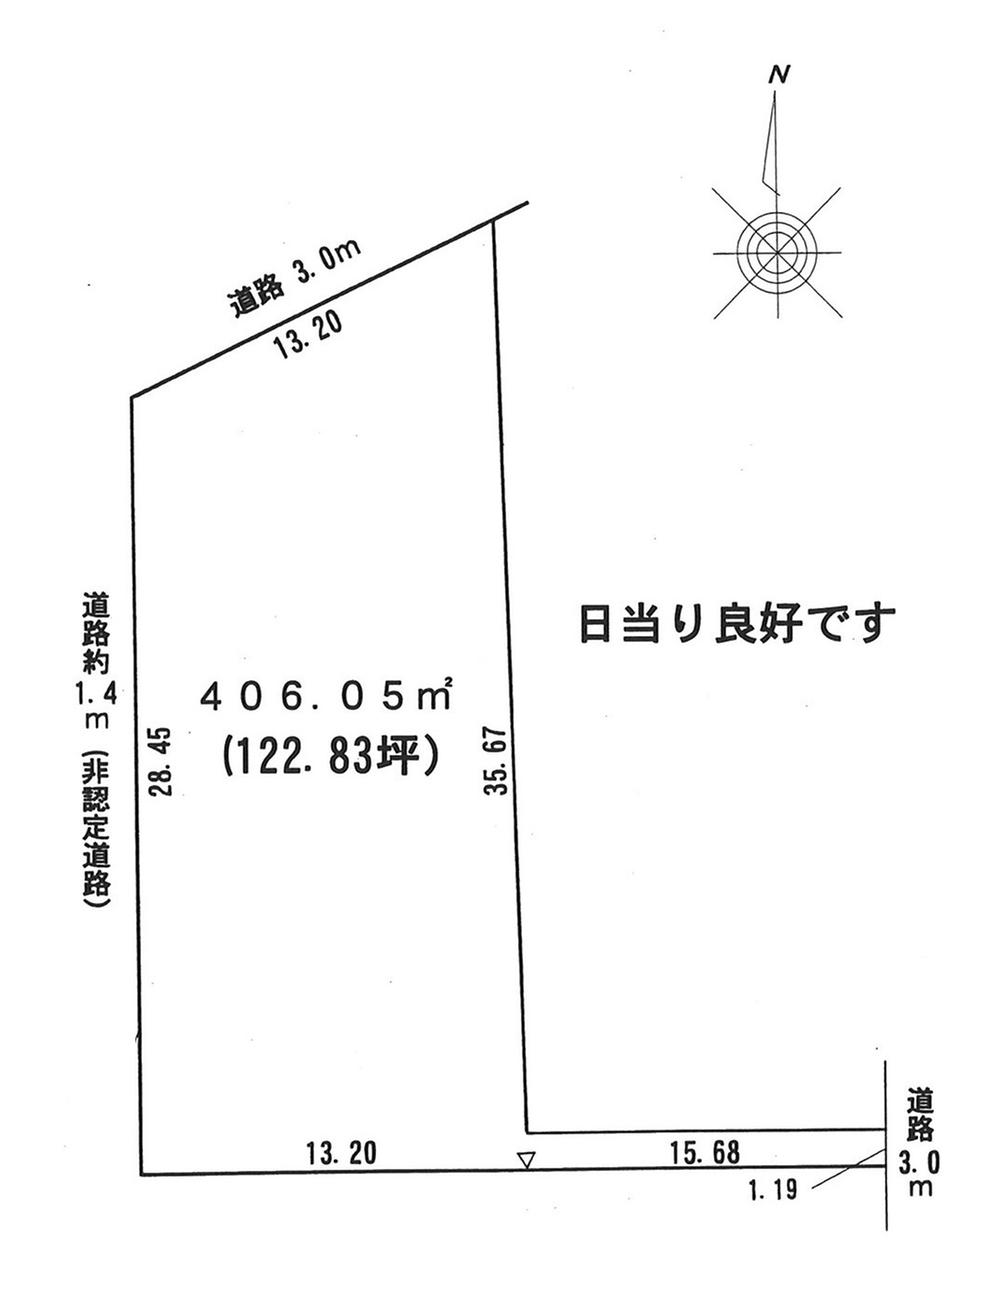 Compartment figure. Land price 12,280,000 yen, Architecture possible per land area 406.05 sq m old existing residential land